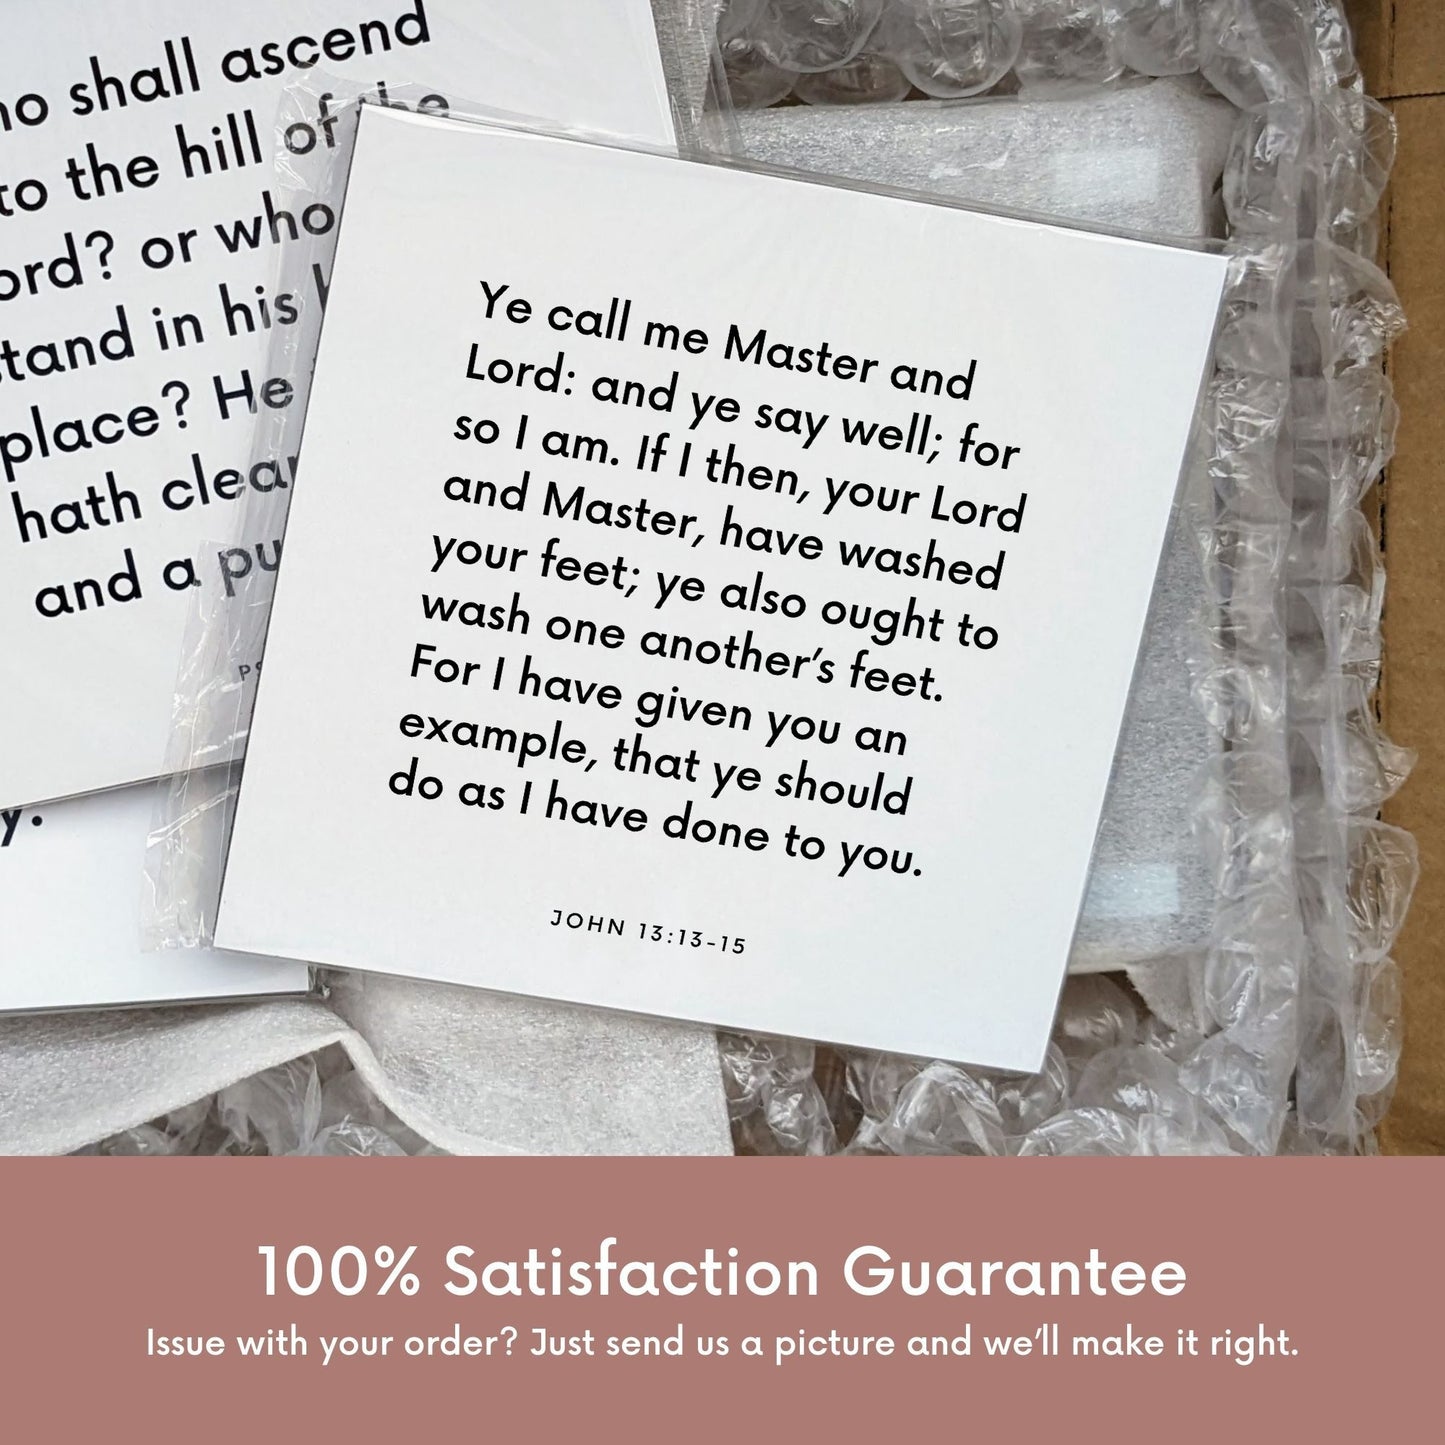 Shipping materials for scripture tile of John 13:13-15 - "I have given you an example, that ye should do as I have"